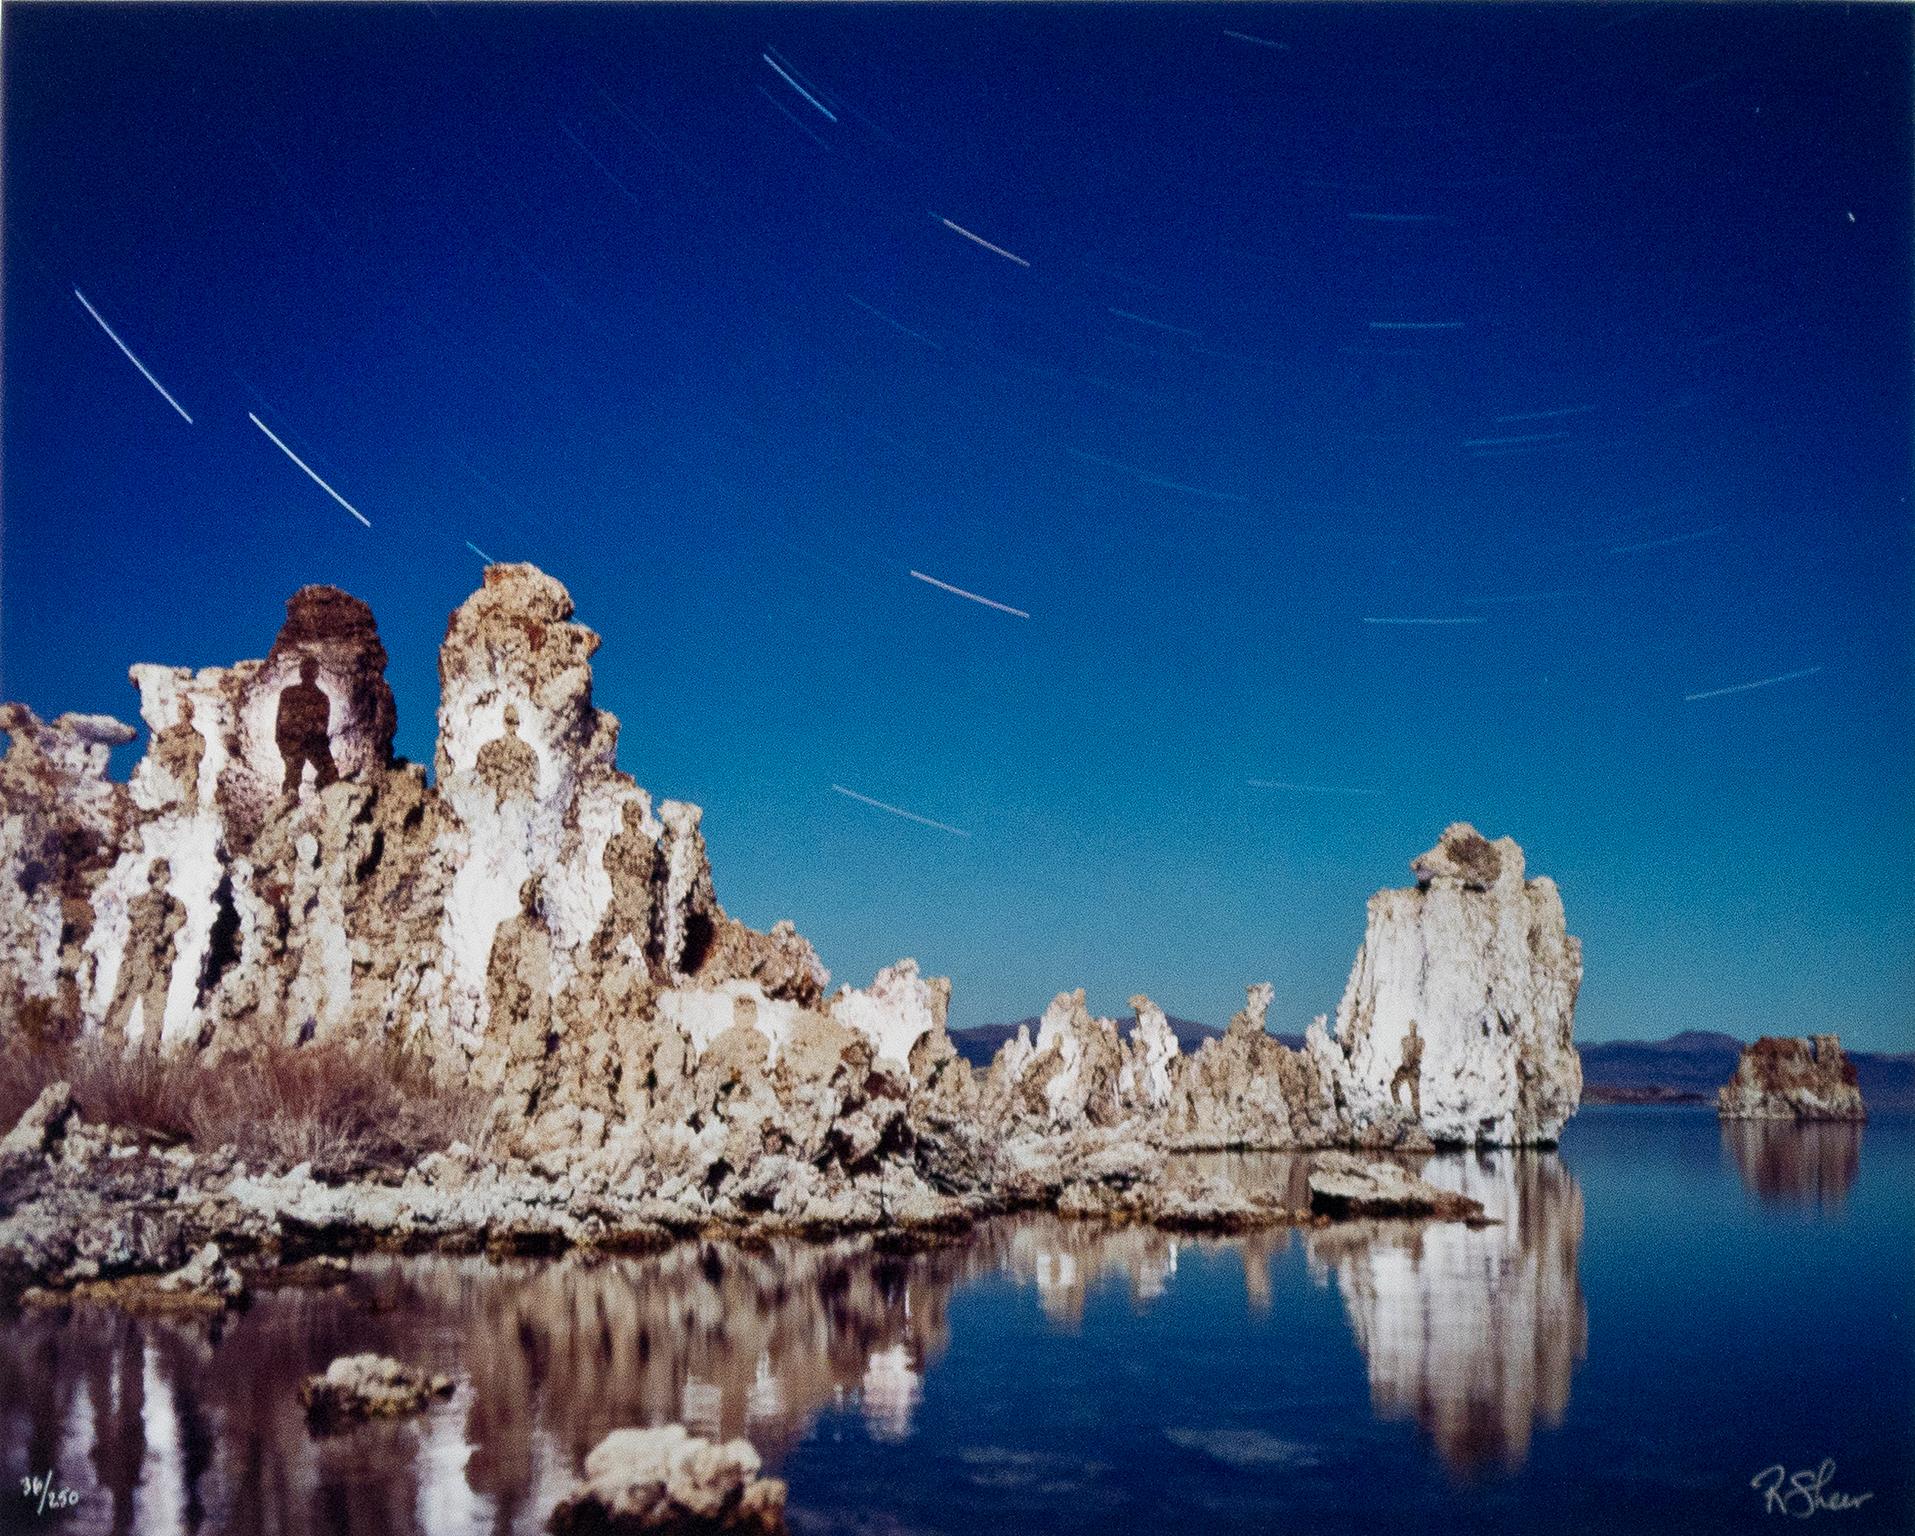 "Mono Lake, Spirit Shadows No. 1," is an original fine-art performance photograph by Robert Kawika Sheer. The artist signed this piece in the lower right and editioned it in the lower left. Edition 36/250. The image depicts the limestone rock